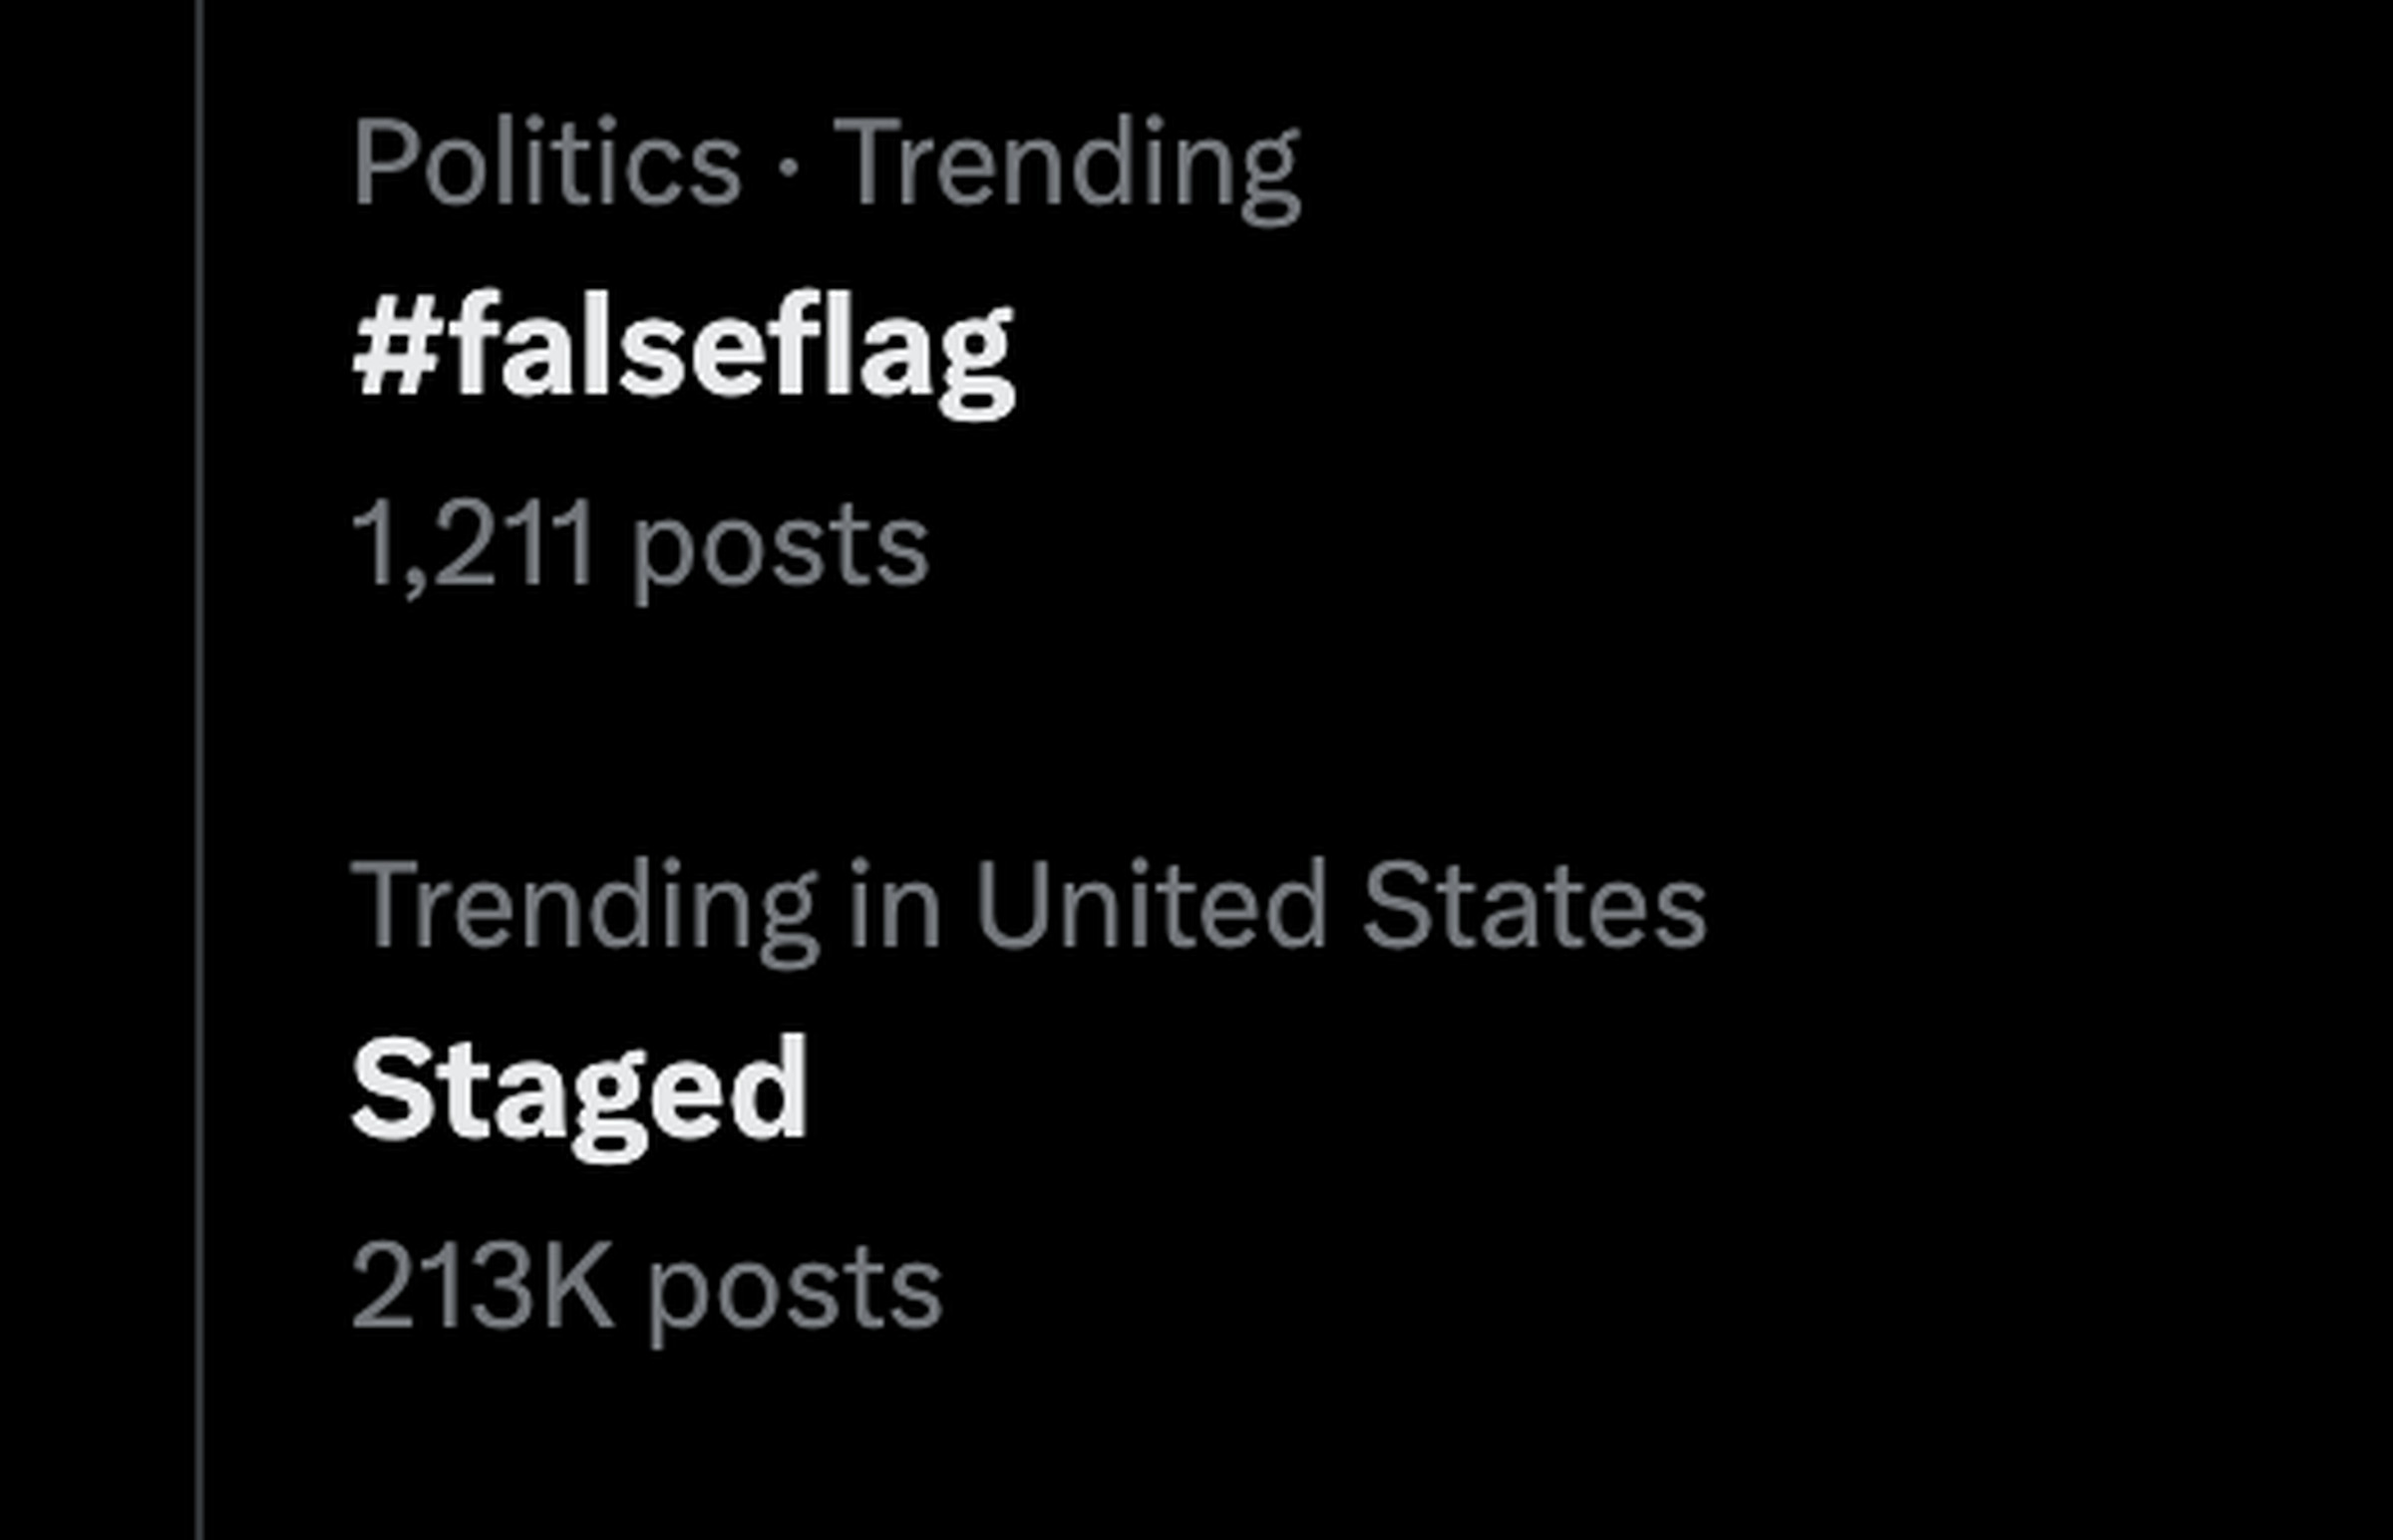 “#falseflag” is listed with 1,211 posts and “staged” is listed with 213k psots.